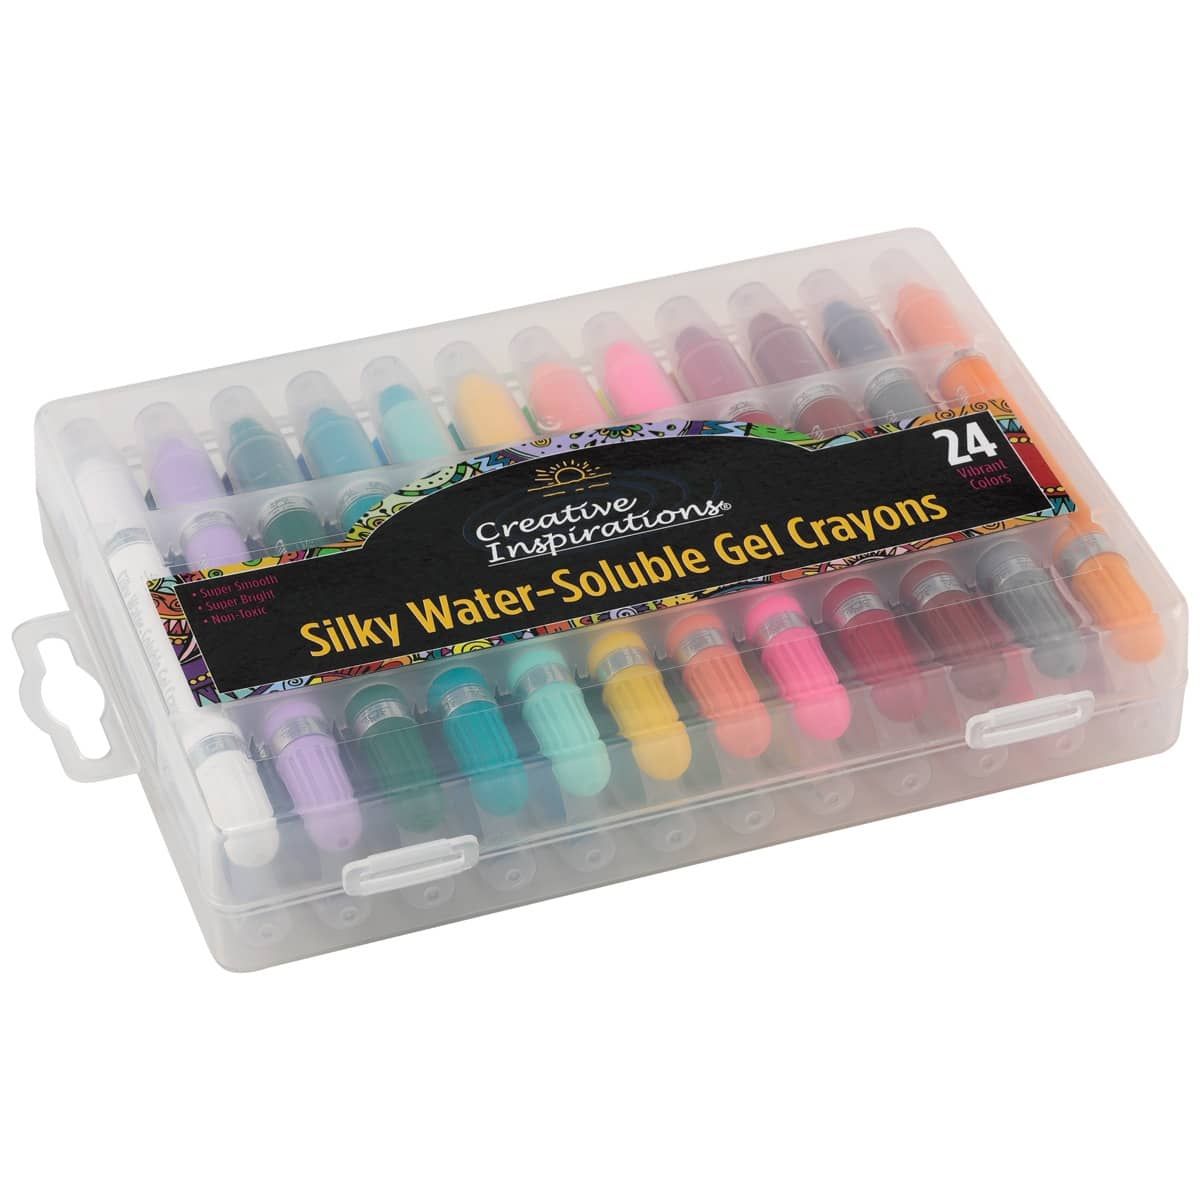 24 Colors in a durable storage tote box